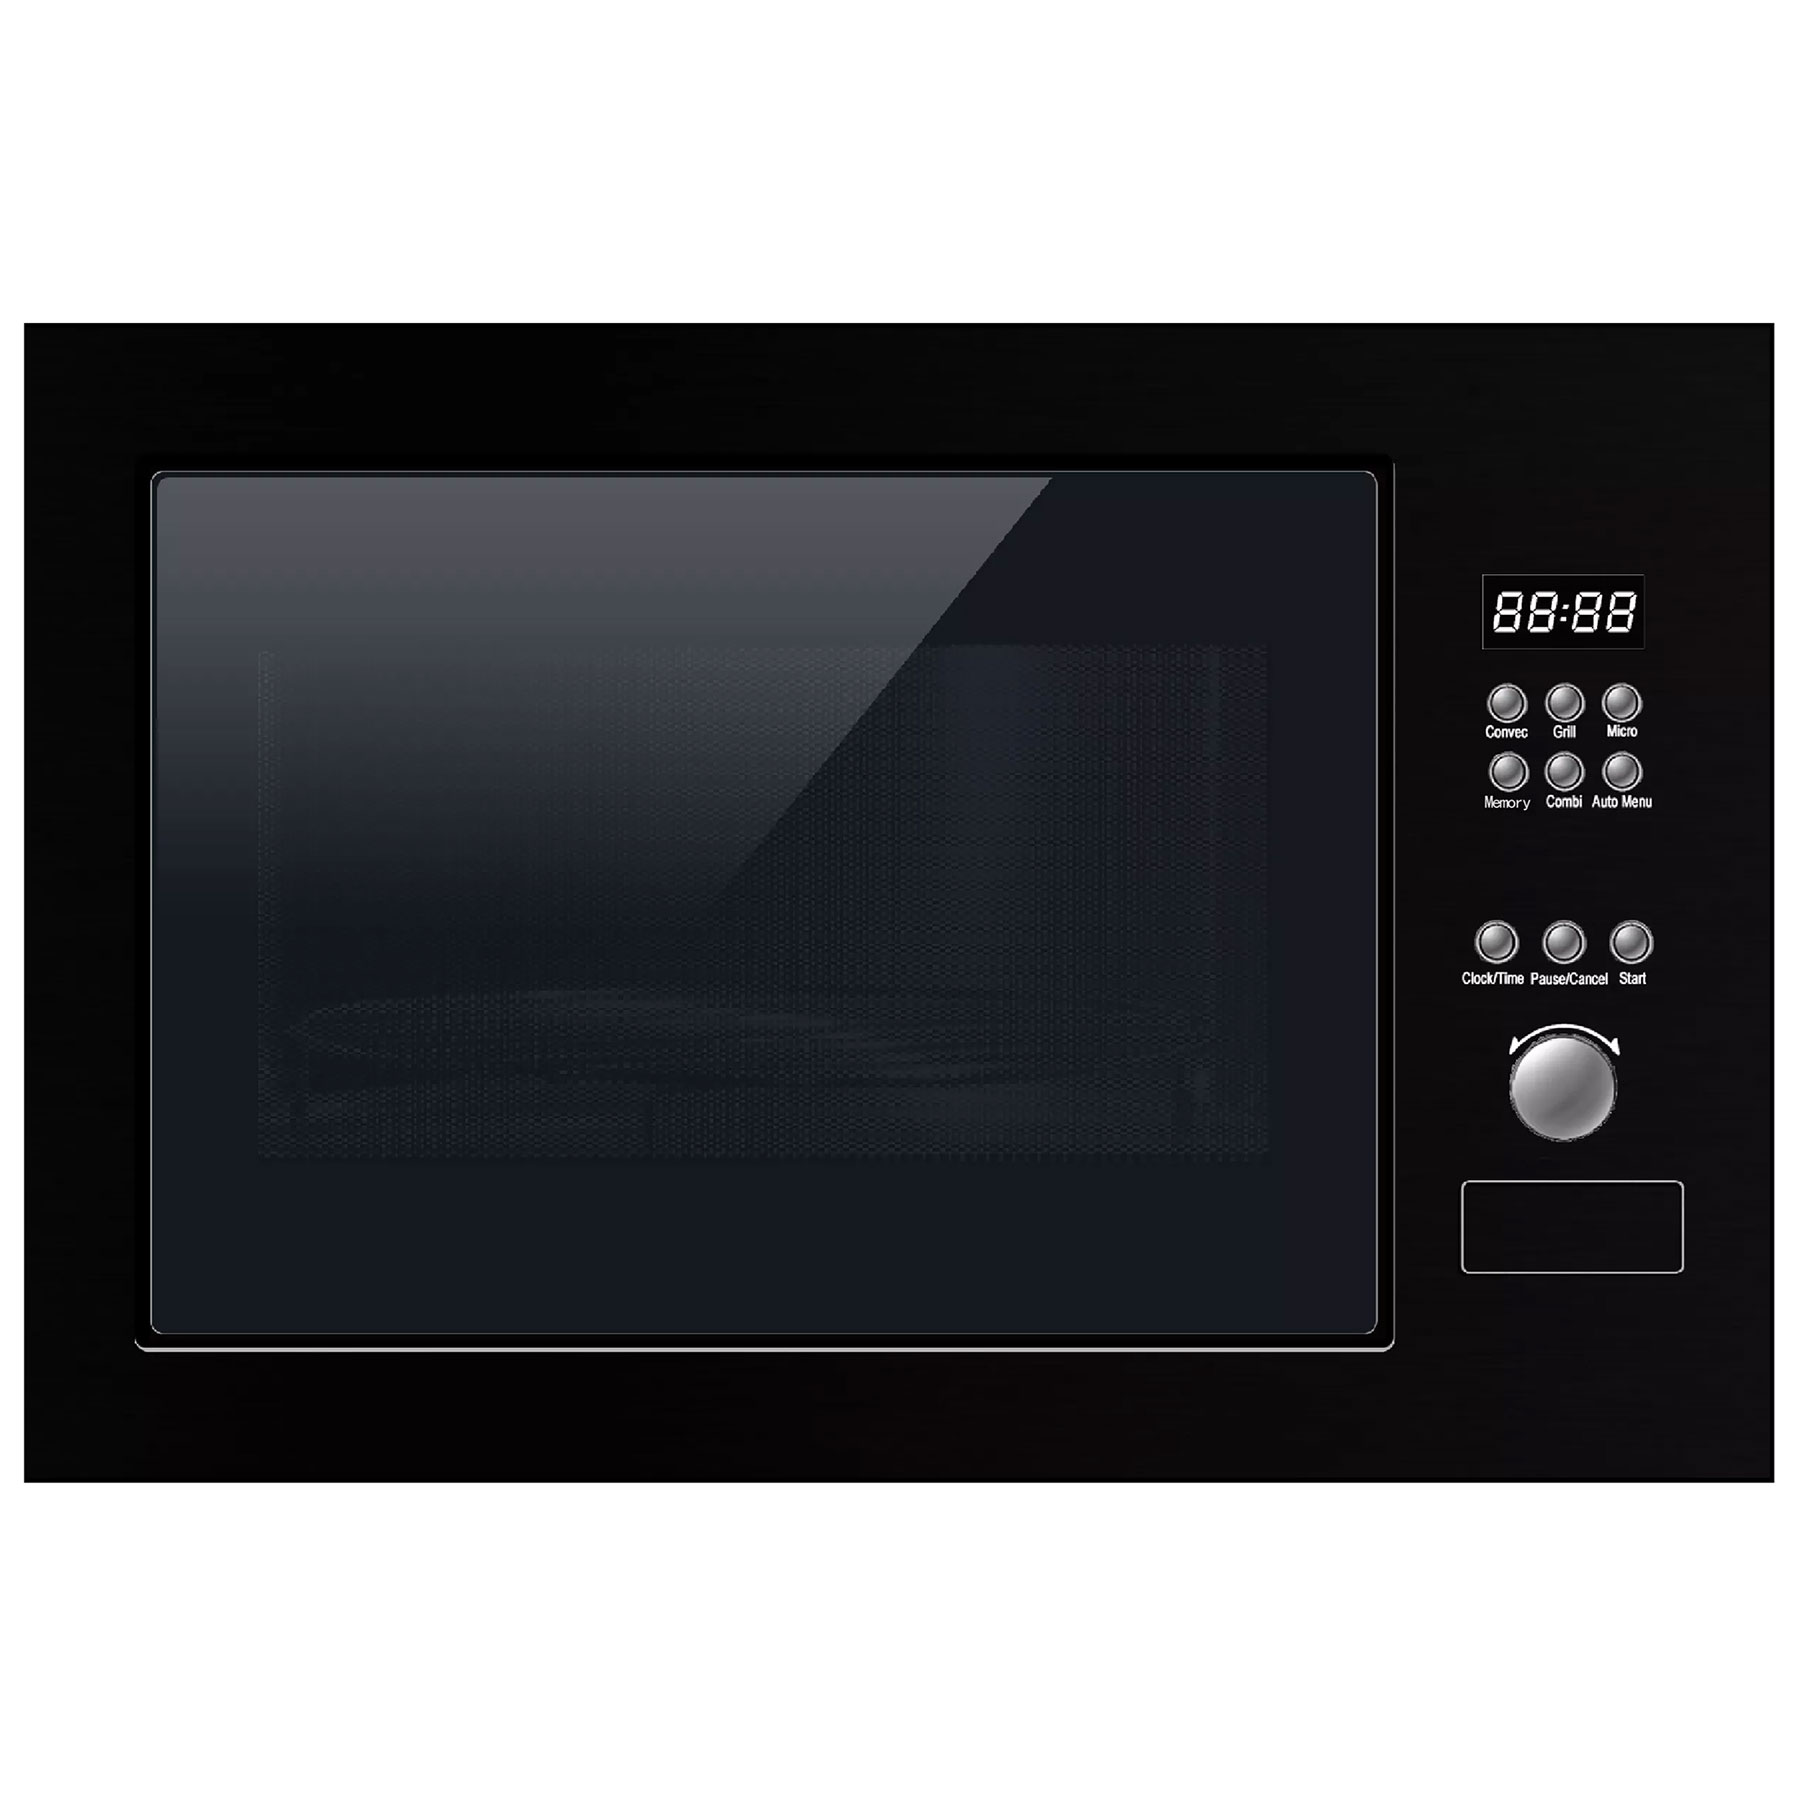 Culina UBCOMBI31BK Built In Combination Microwave Oven in Black 900W 3